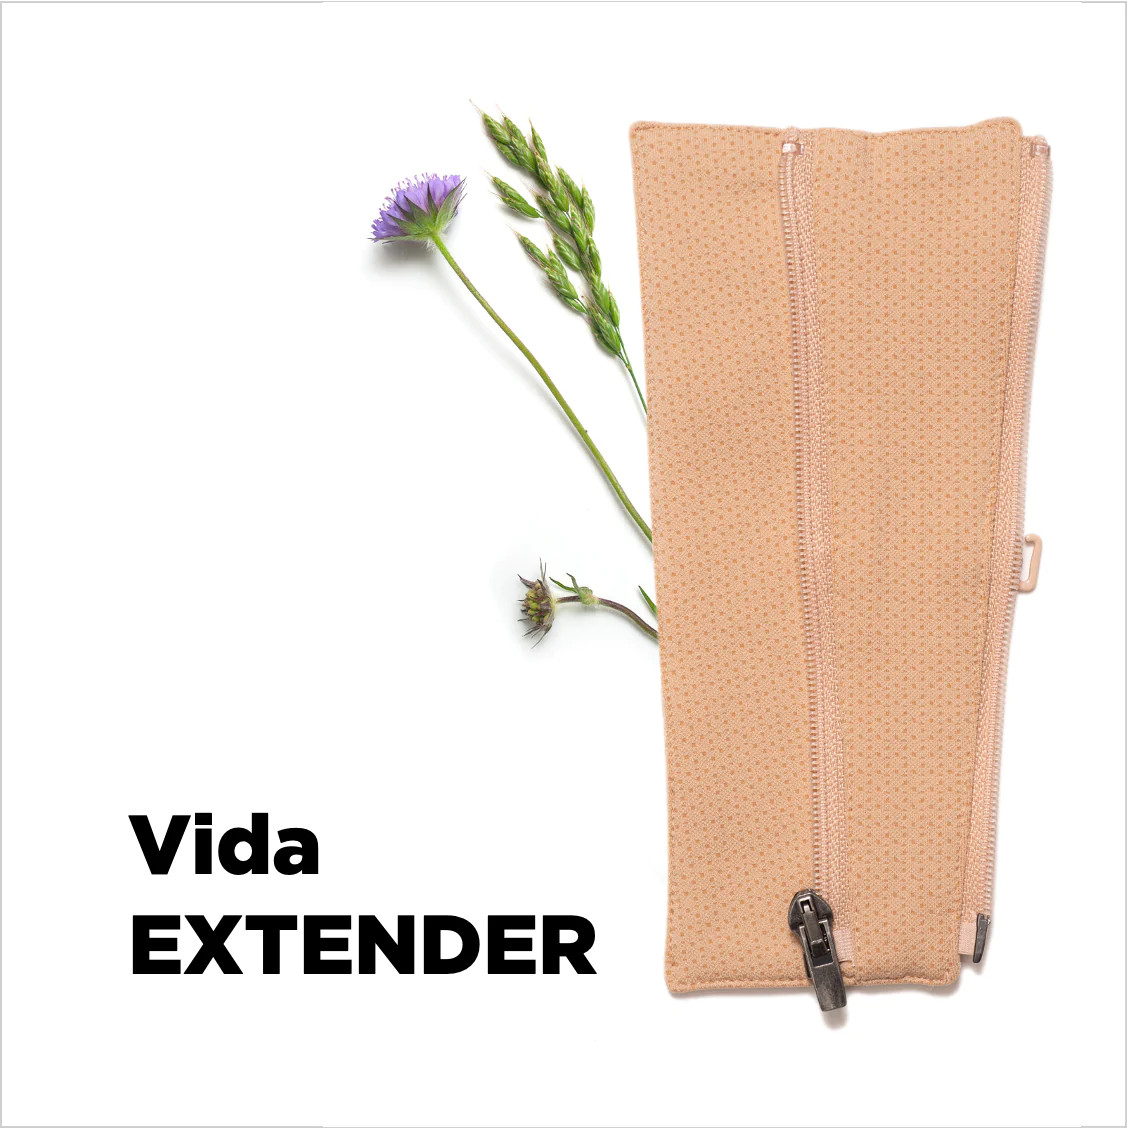 VidaEXTENDER by Prairie Wear - For use with HuggerVida Only